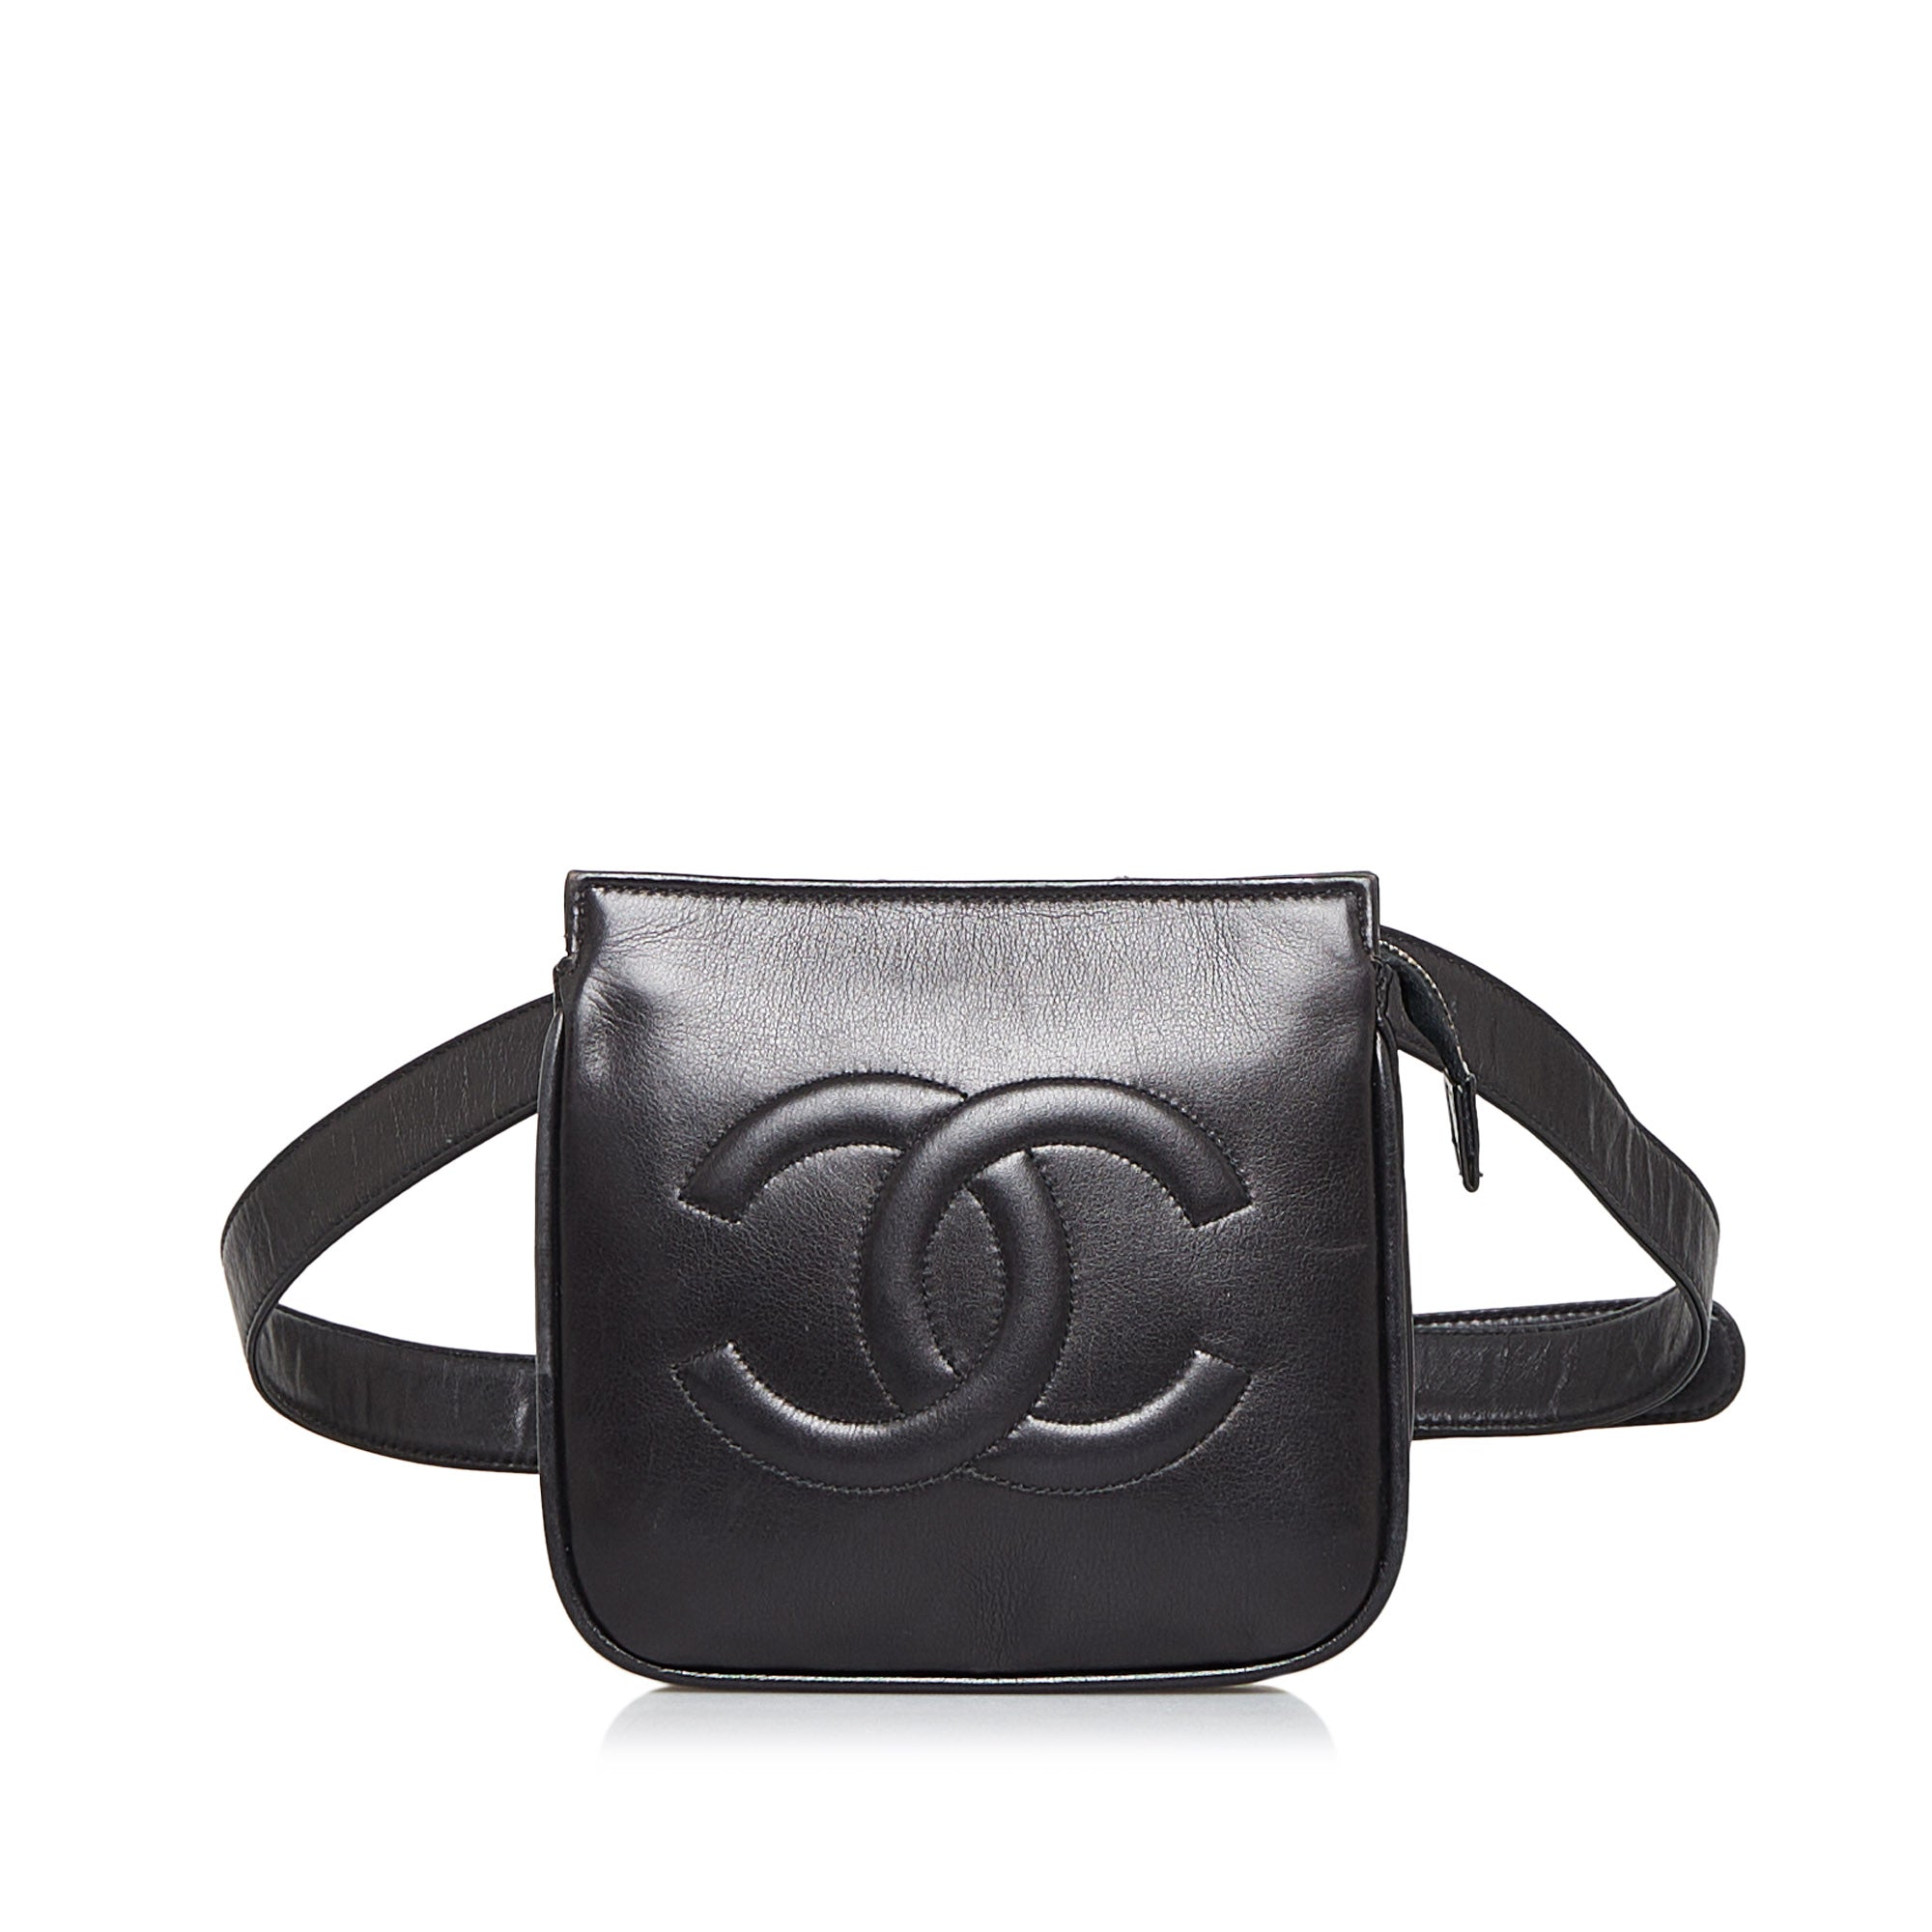 Chanel Patent Quilted Black Fanny Pack Gold Turn lock